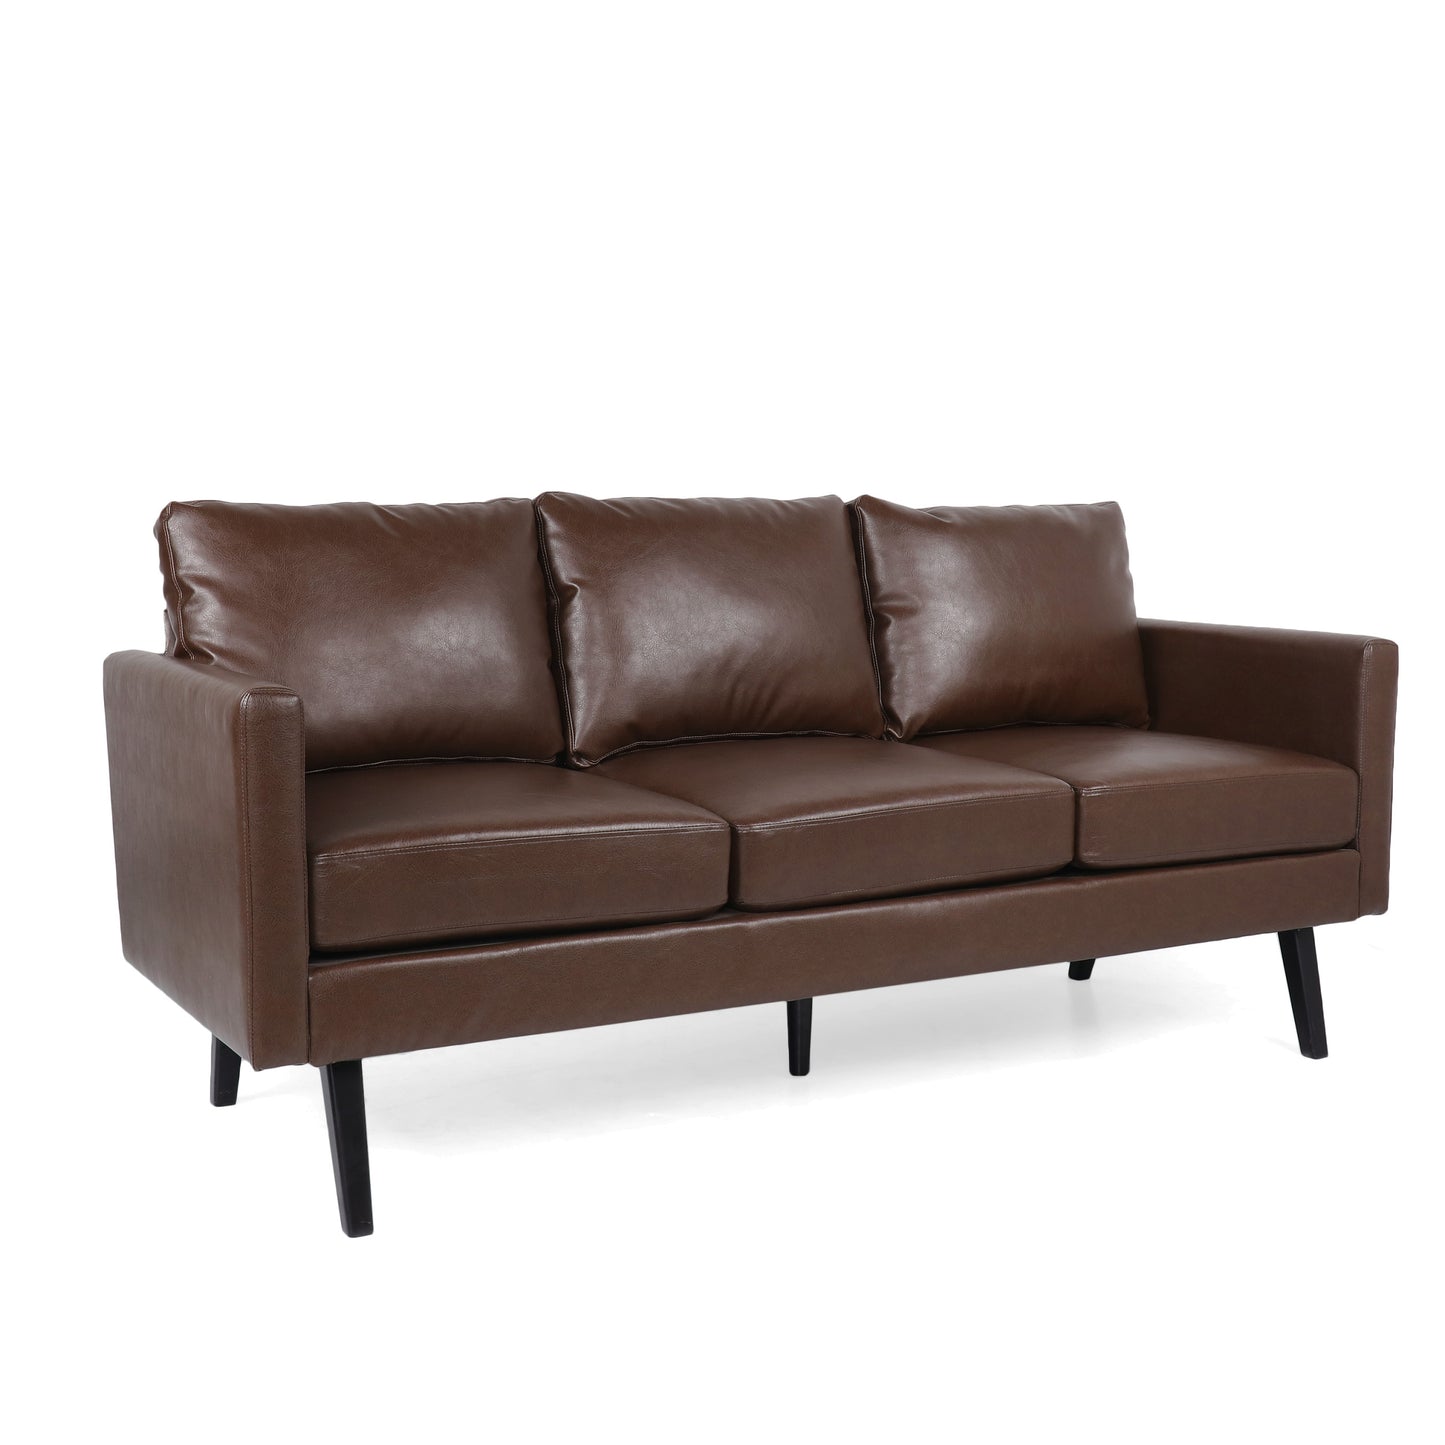 Dowd Mid Century Modern Faux Leather 3 Seater Sofa